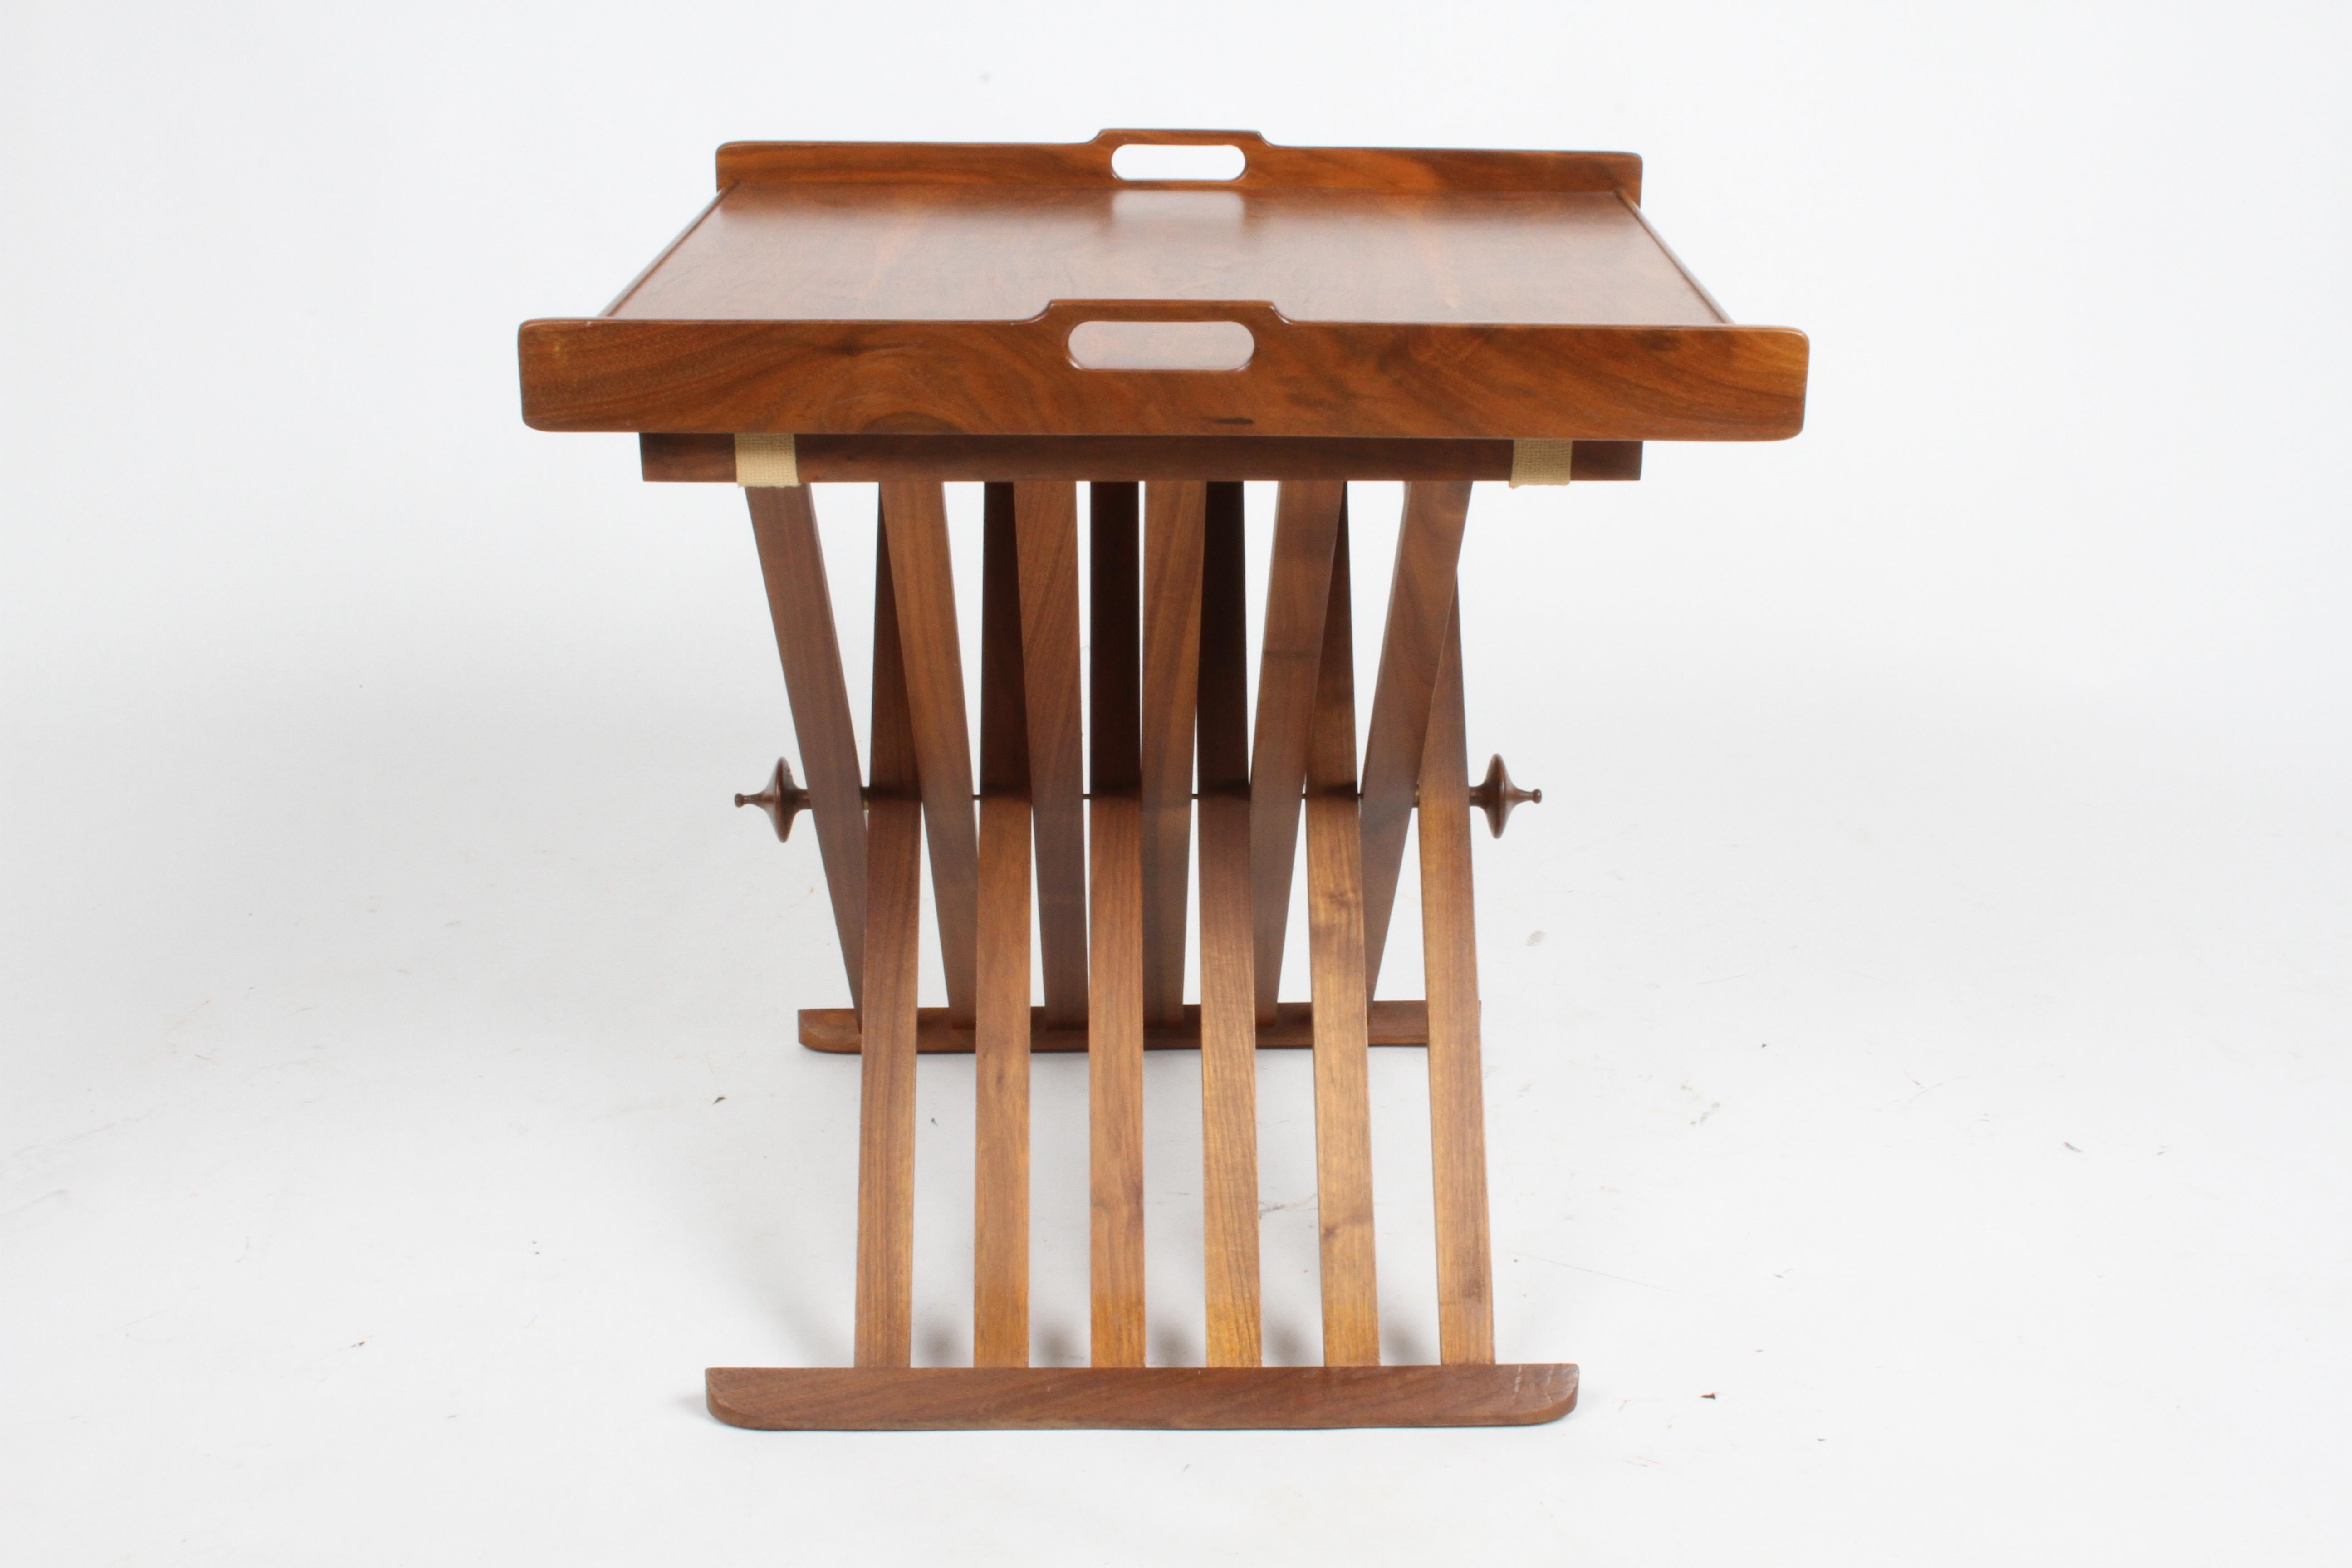 Canvas 1960s Walnut Campaign Tray Table by Kipp Stewart & Stewart McDougall for Drexel  For Sale